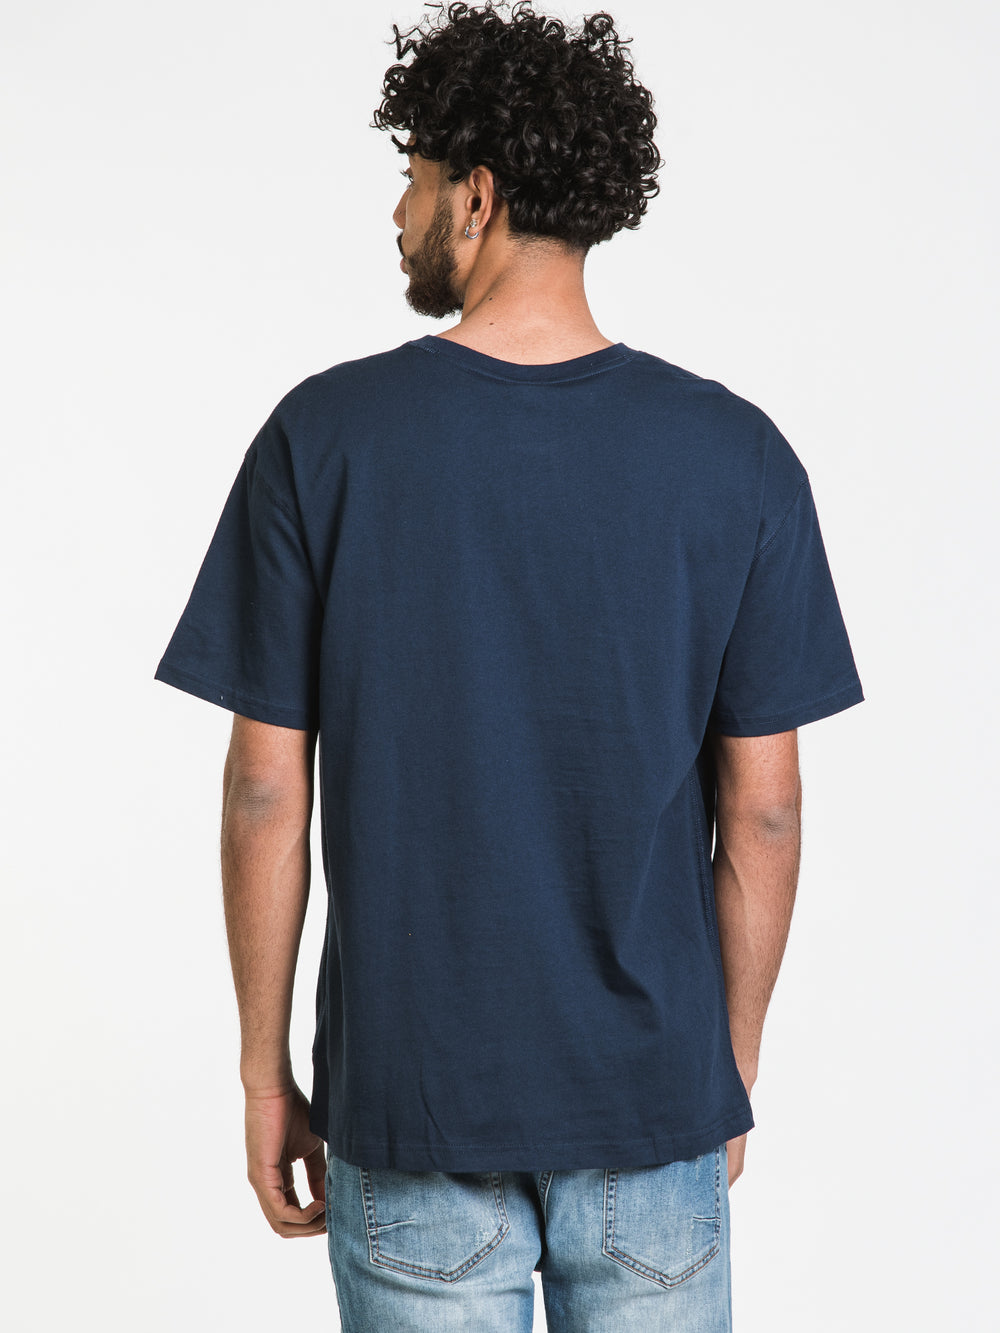 NEW BALANCE ESSENTIALS EMBROIDERED T-SHIRT - CLEARANCE